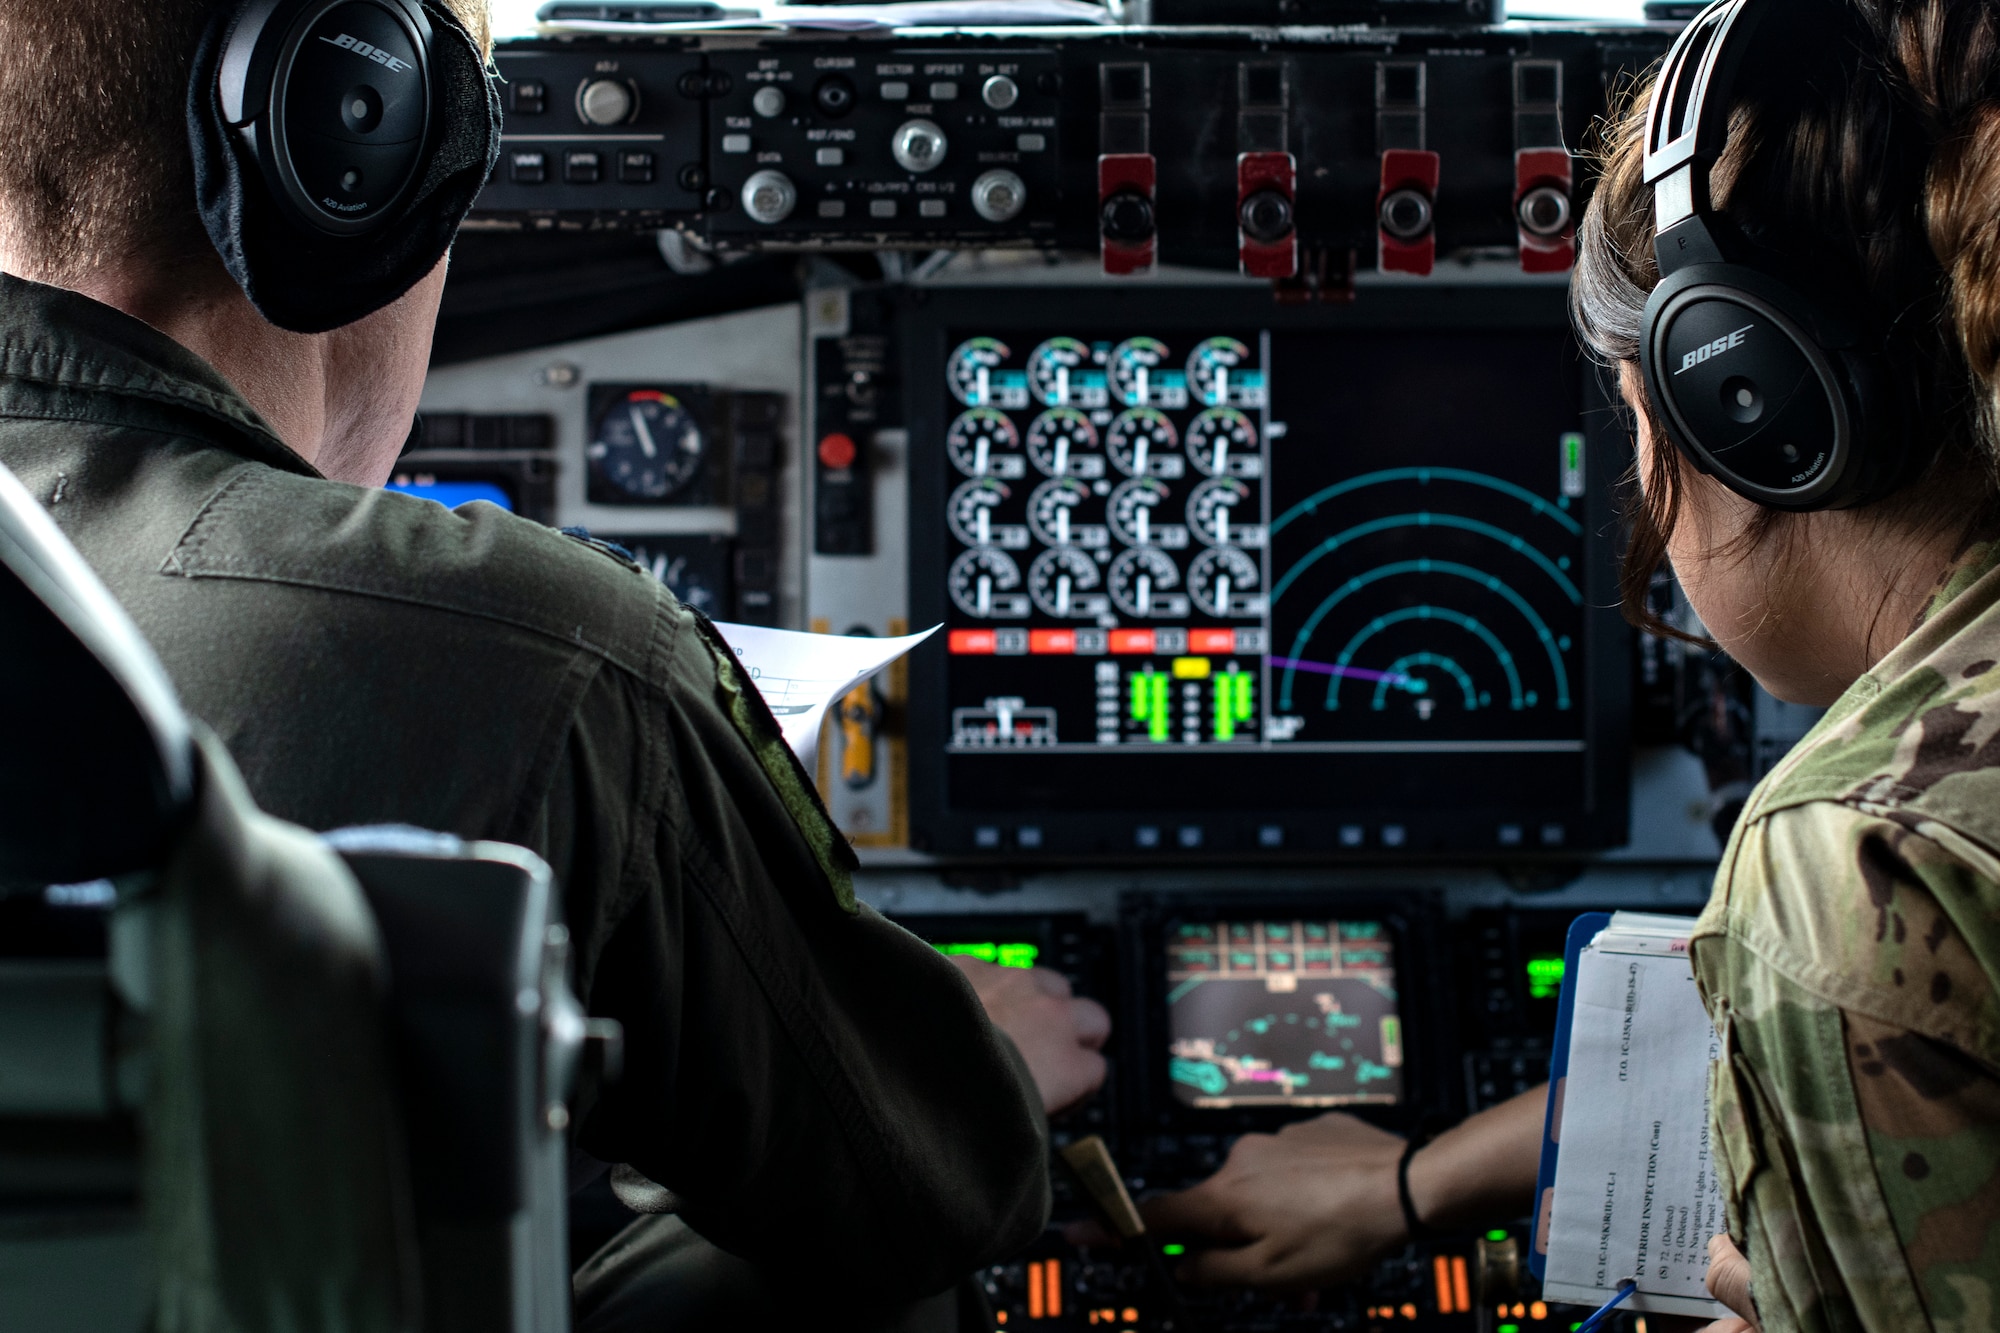 U.S. Air Force Capts. Kemper Peterson, left, and Crosby Shaver, 909th Air Refueling Squadron KC-135 Stratotanker pilots, conduct pre-flight checks at Kadena Air Base, Japan, Oct. 14, 2021. The 909th ARS is the premiere force for aerial refueling operations in the Indo-Pacific theater, supporting U.S. forces and regional allies and partners. (U.S. Air Force photo by Senior Airman Jessi Monte)